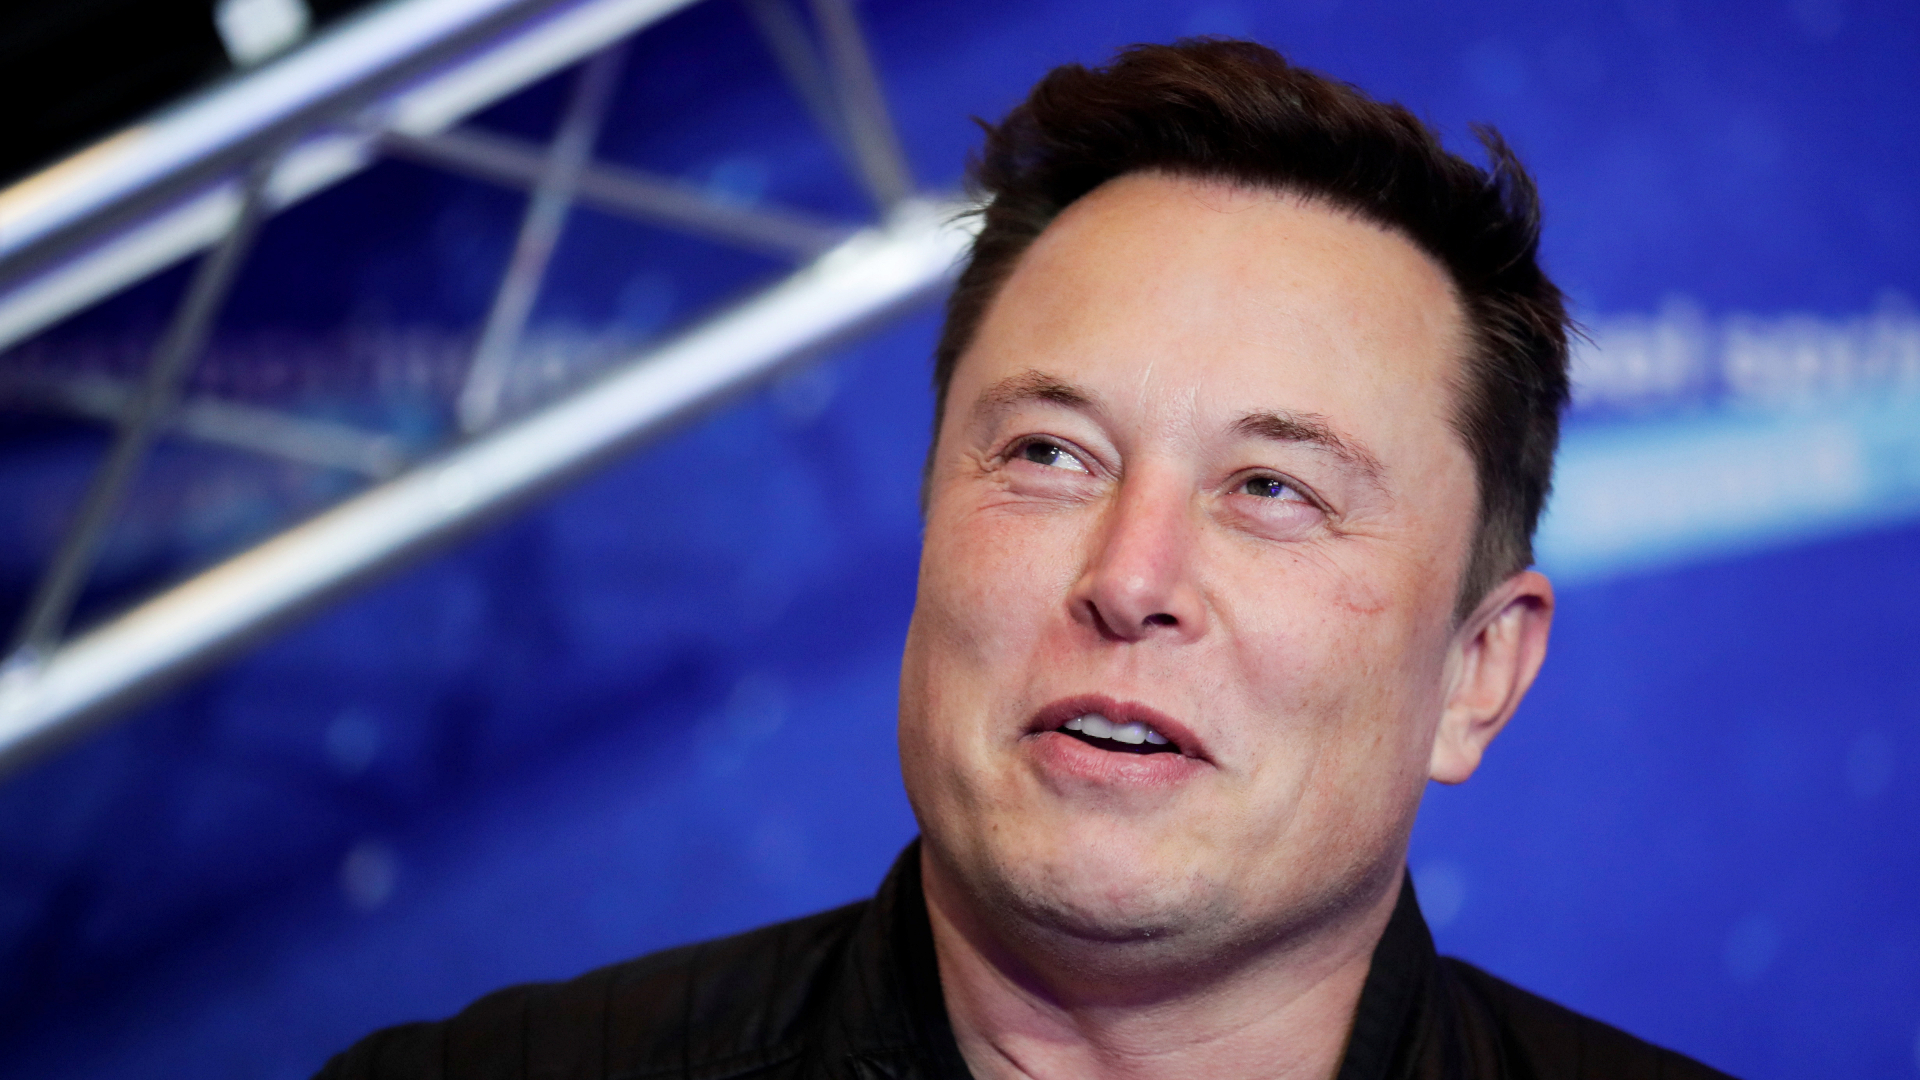 The number of staff choosing to leave appears to have surprised Elon Musk and his team.